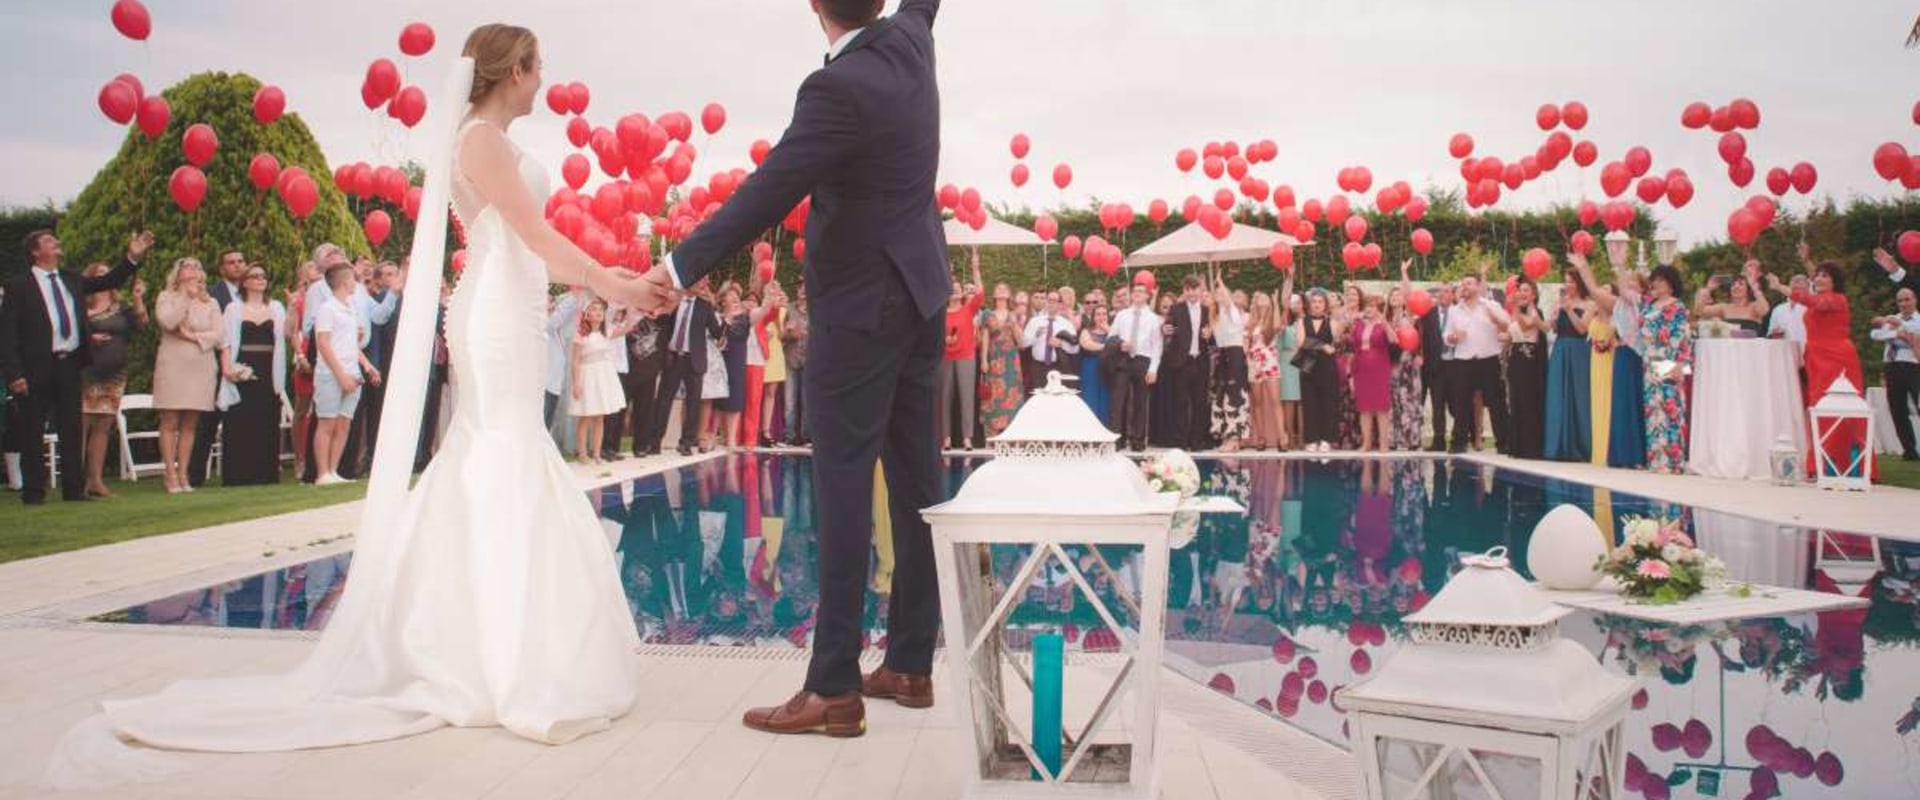 How to Plan a Medium-Sized Wedding for 50-150 Guests